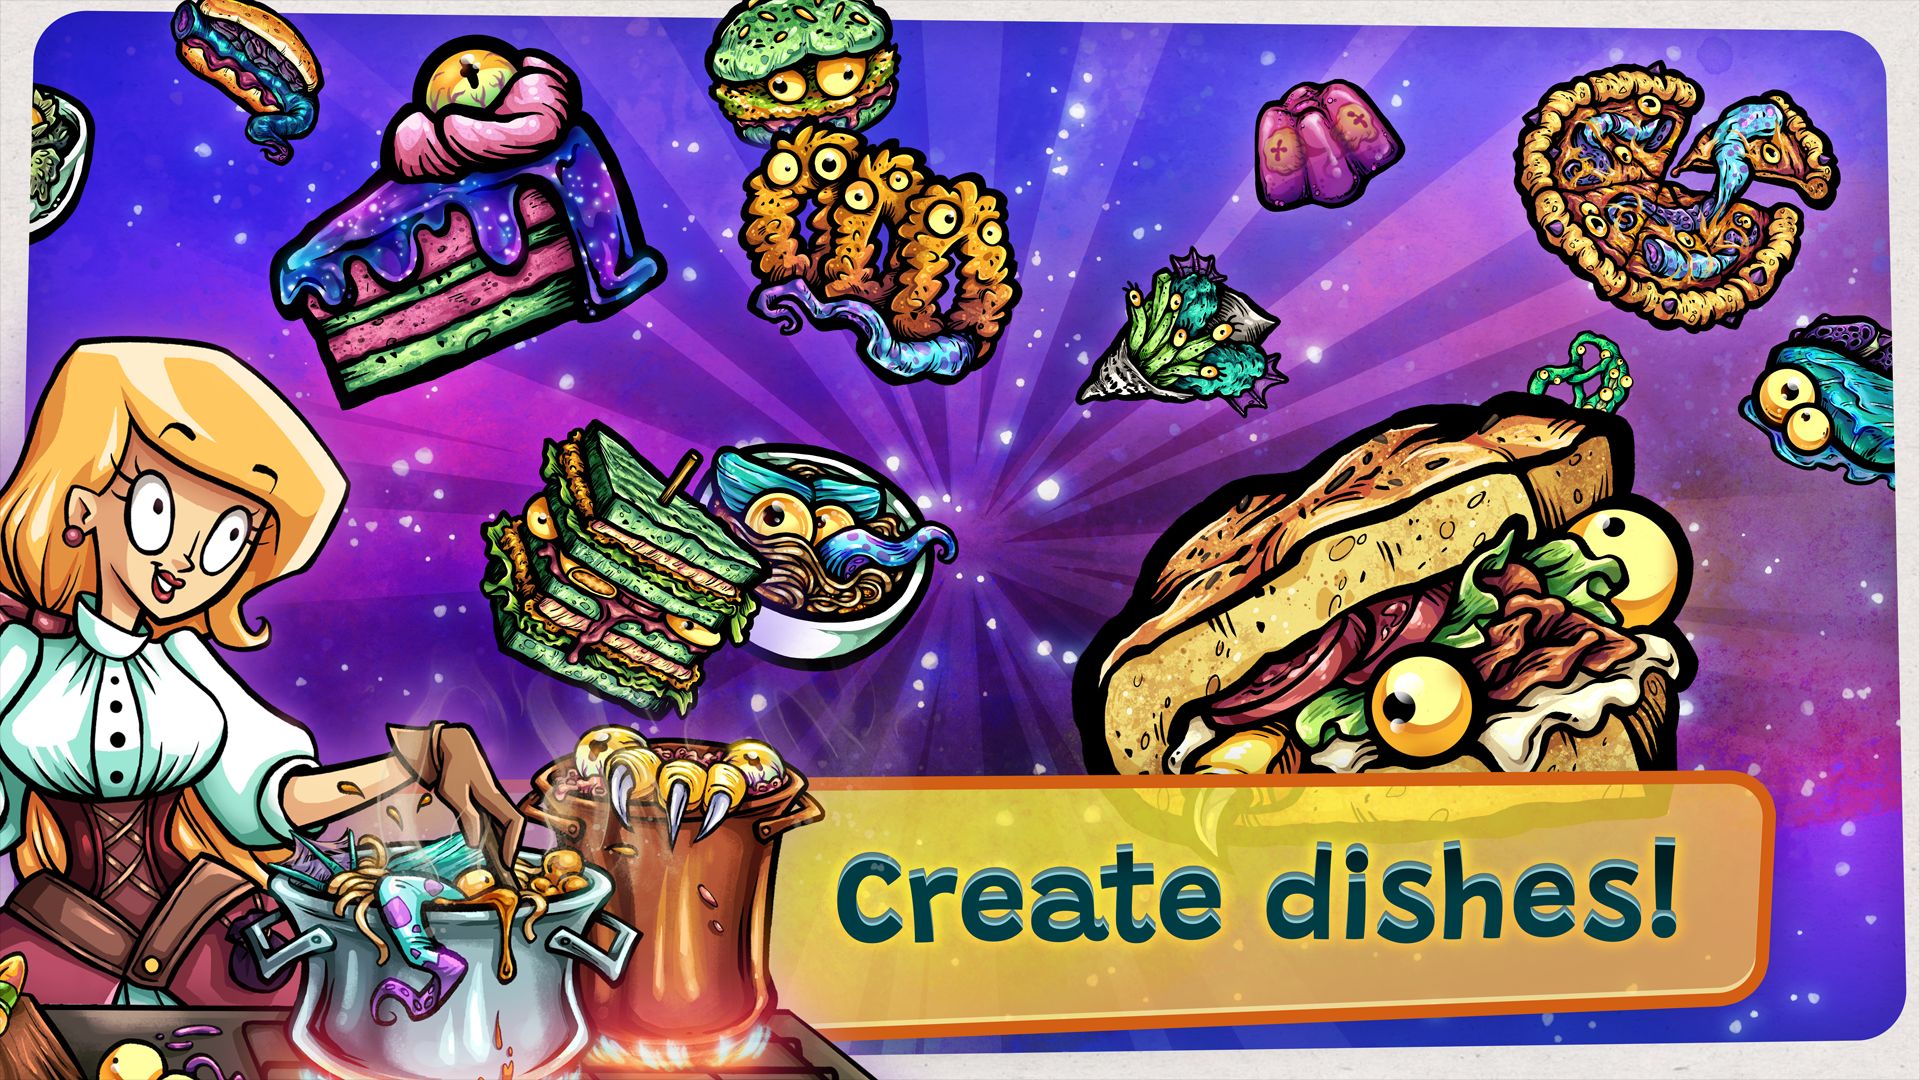 Alien Food Invasion - Android game screenshots.